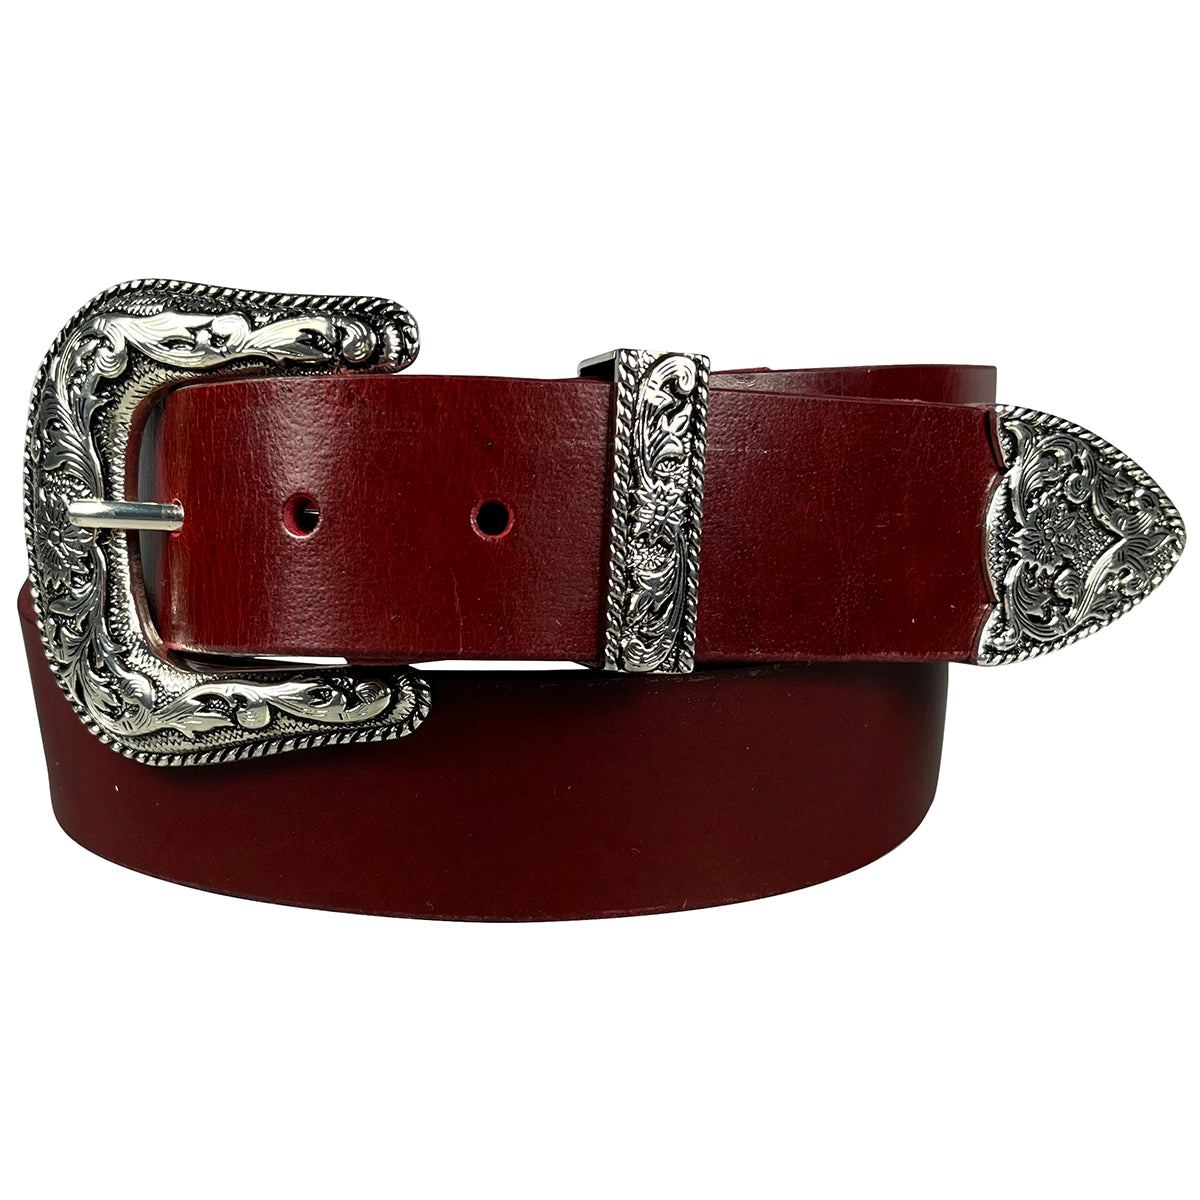 Custom Leather Canada, High quality leather belts